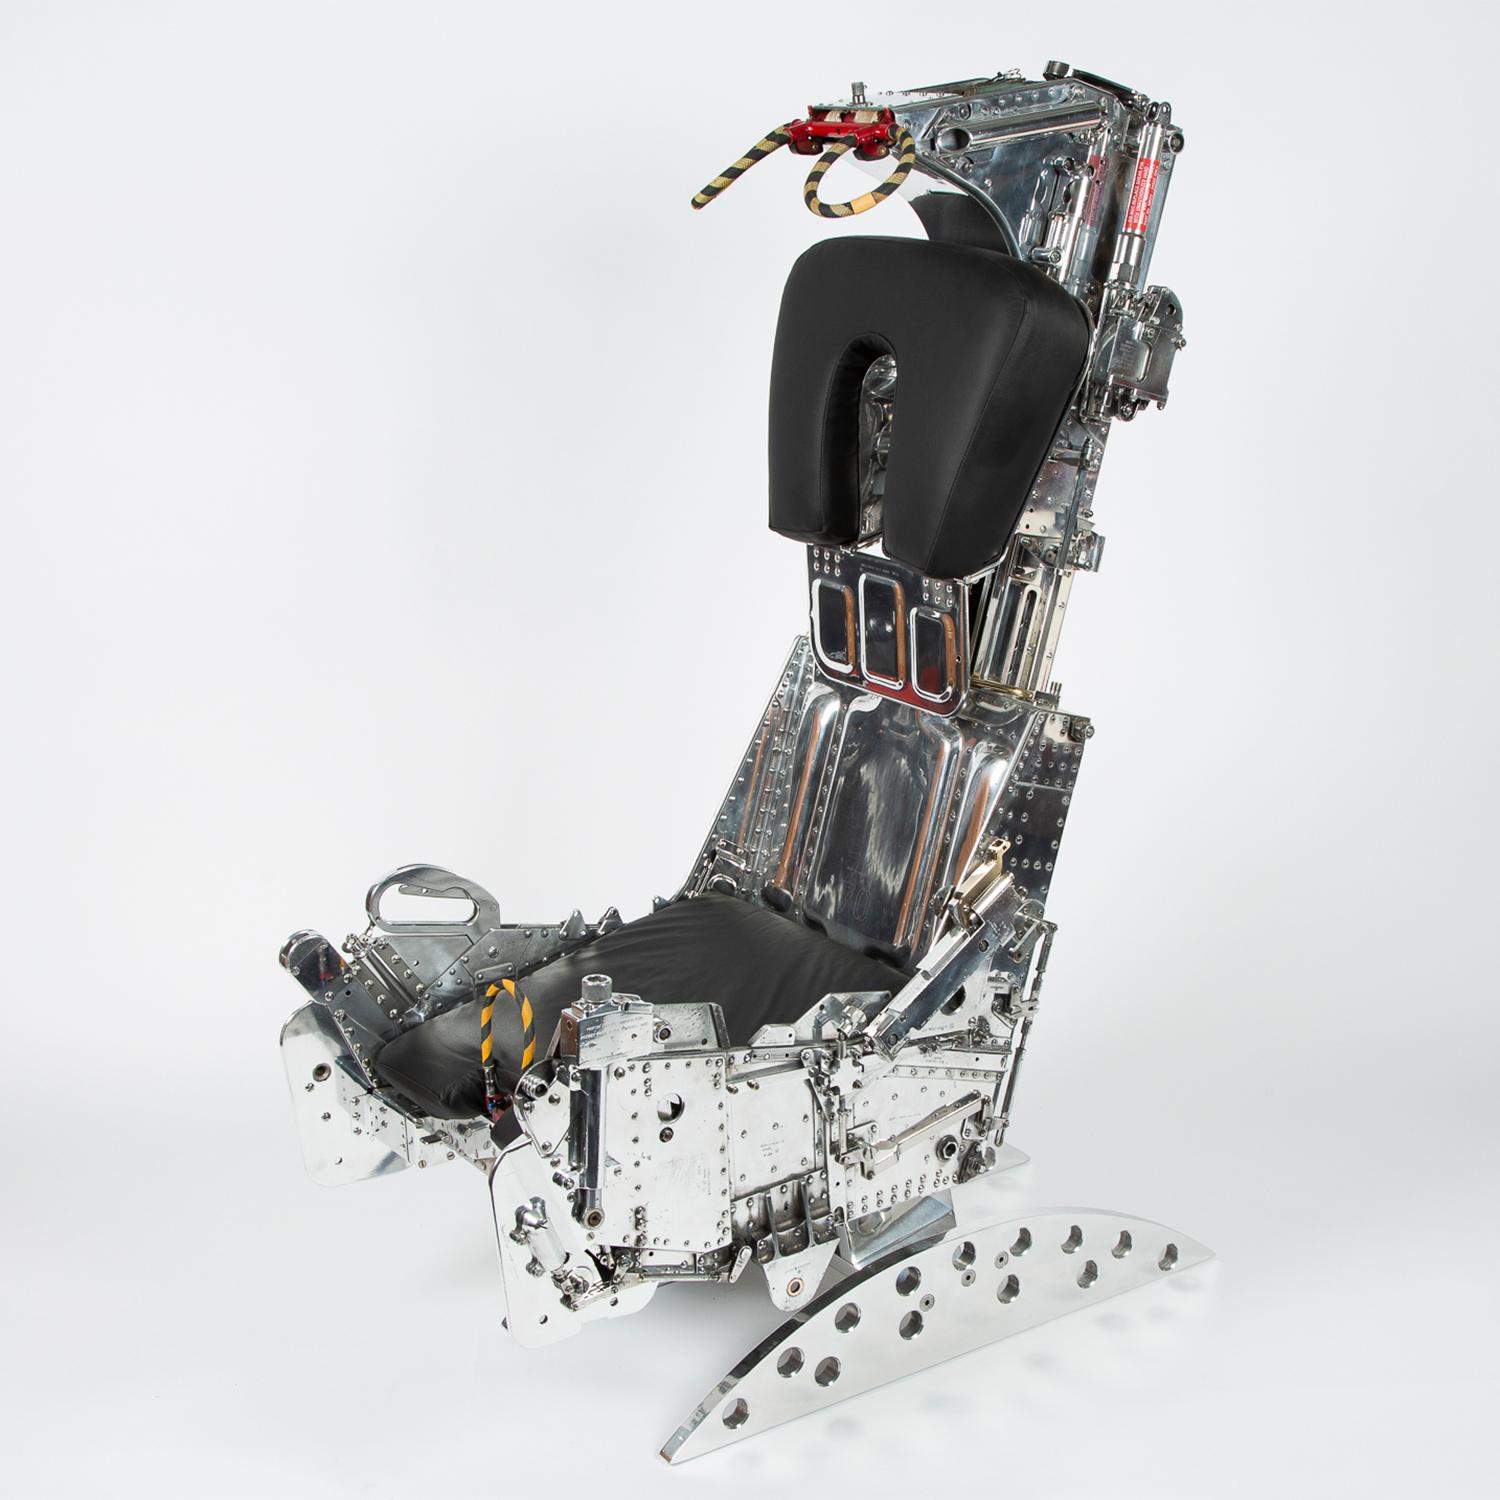 Ejection seat phantom fighter made by Martin & Baker, 1972.
Ejection seat from Phantom II fighter, Royal Air Force, and from
Mc Donnel Douglas F-4. With electric system to raise or lower
the seat all in chrome finish.
Exceptional piece.
 